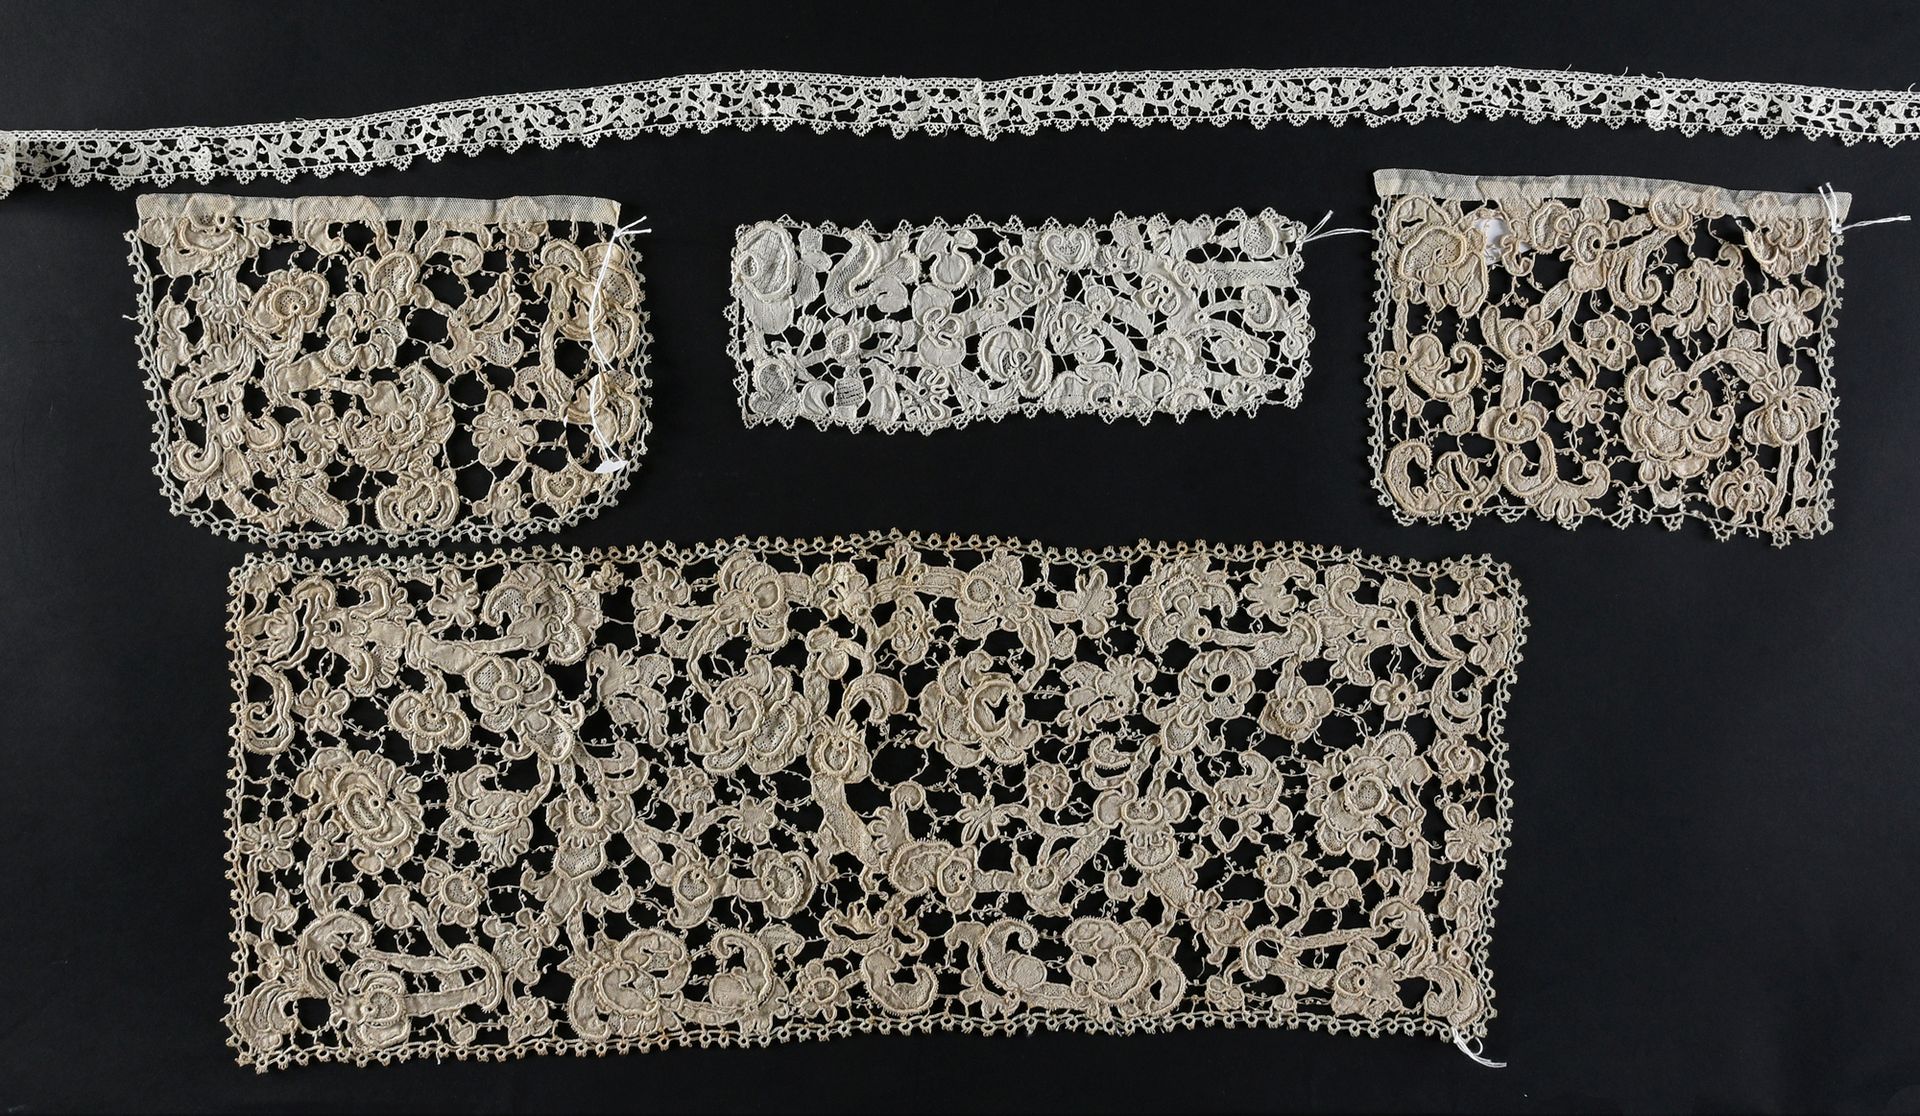 Null Needlepoint lace, Venice, Italy, 2nd half of the 17th century.

Four docume&hellip;